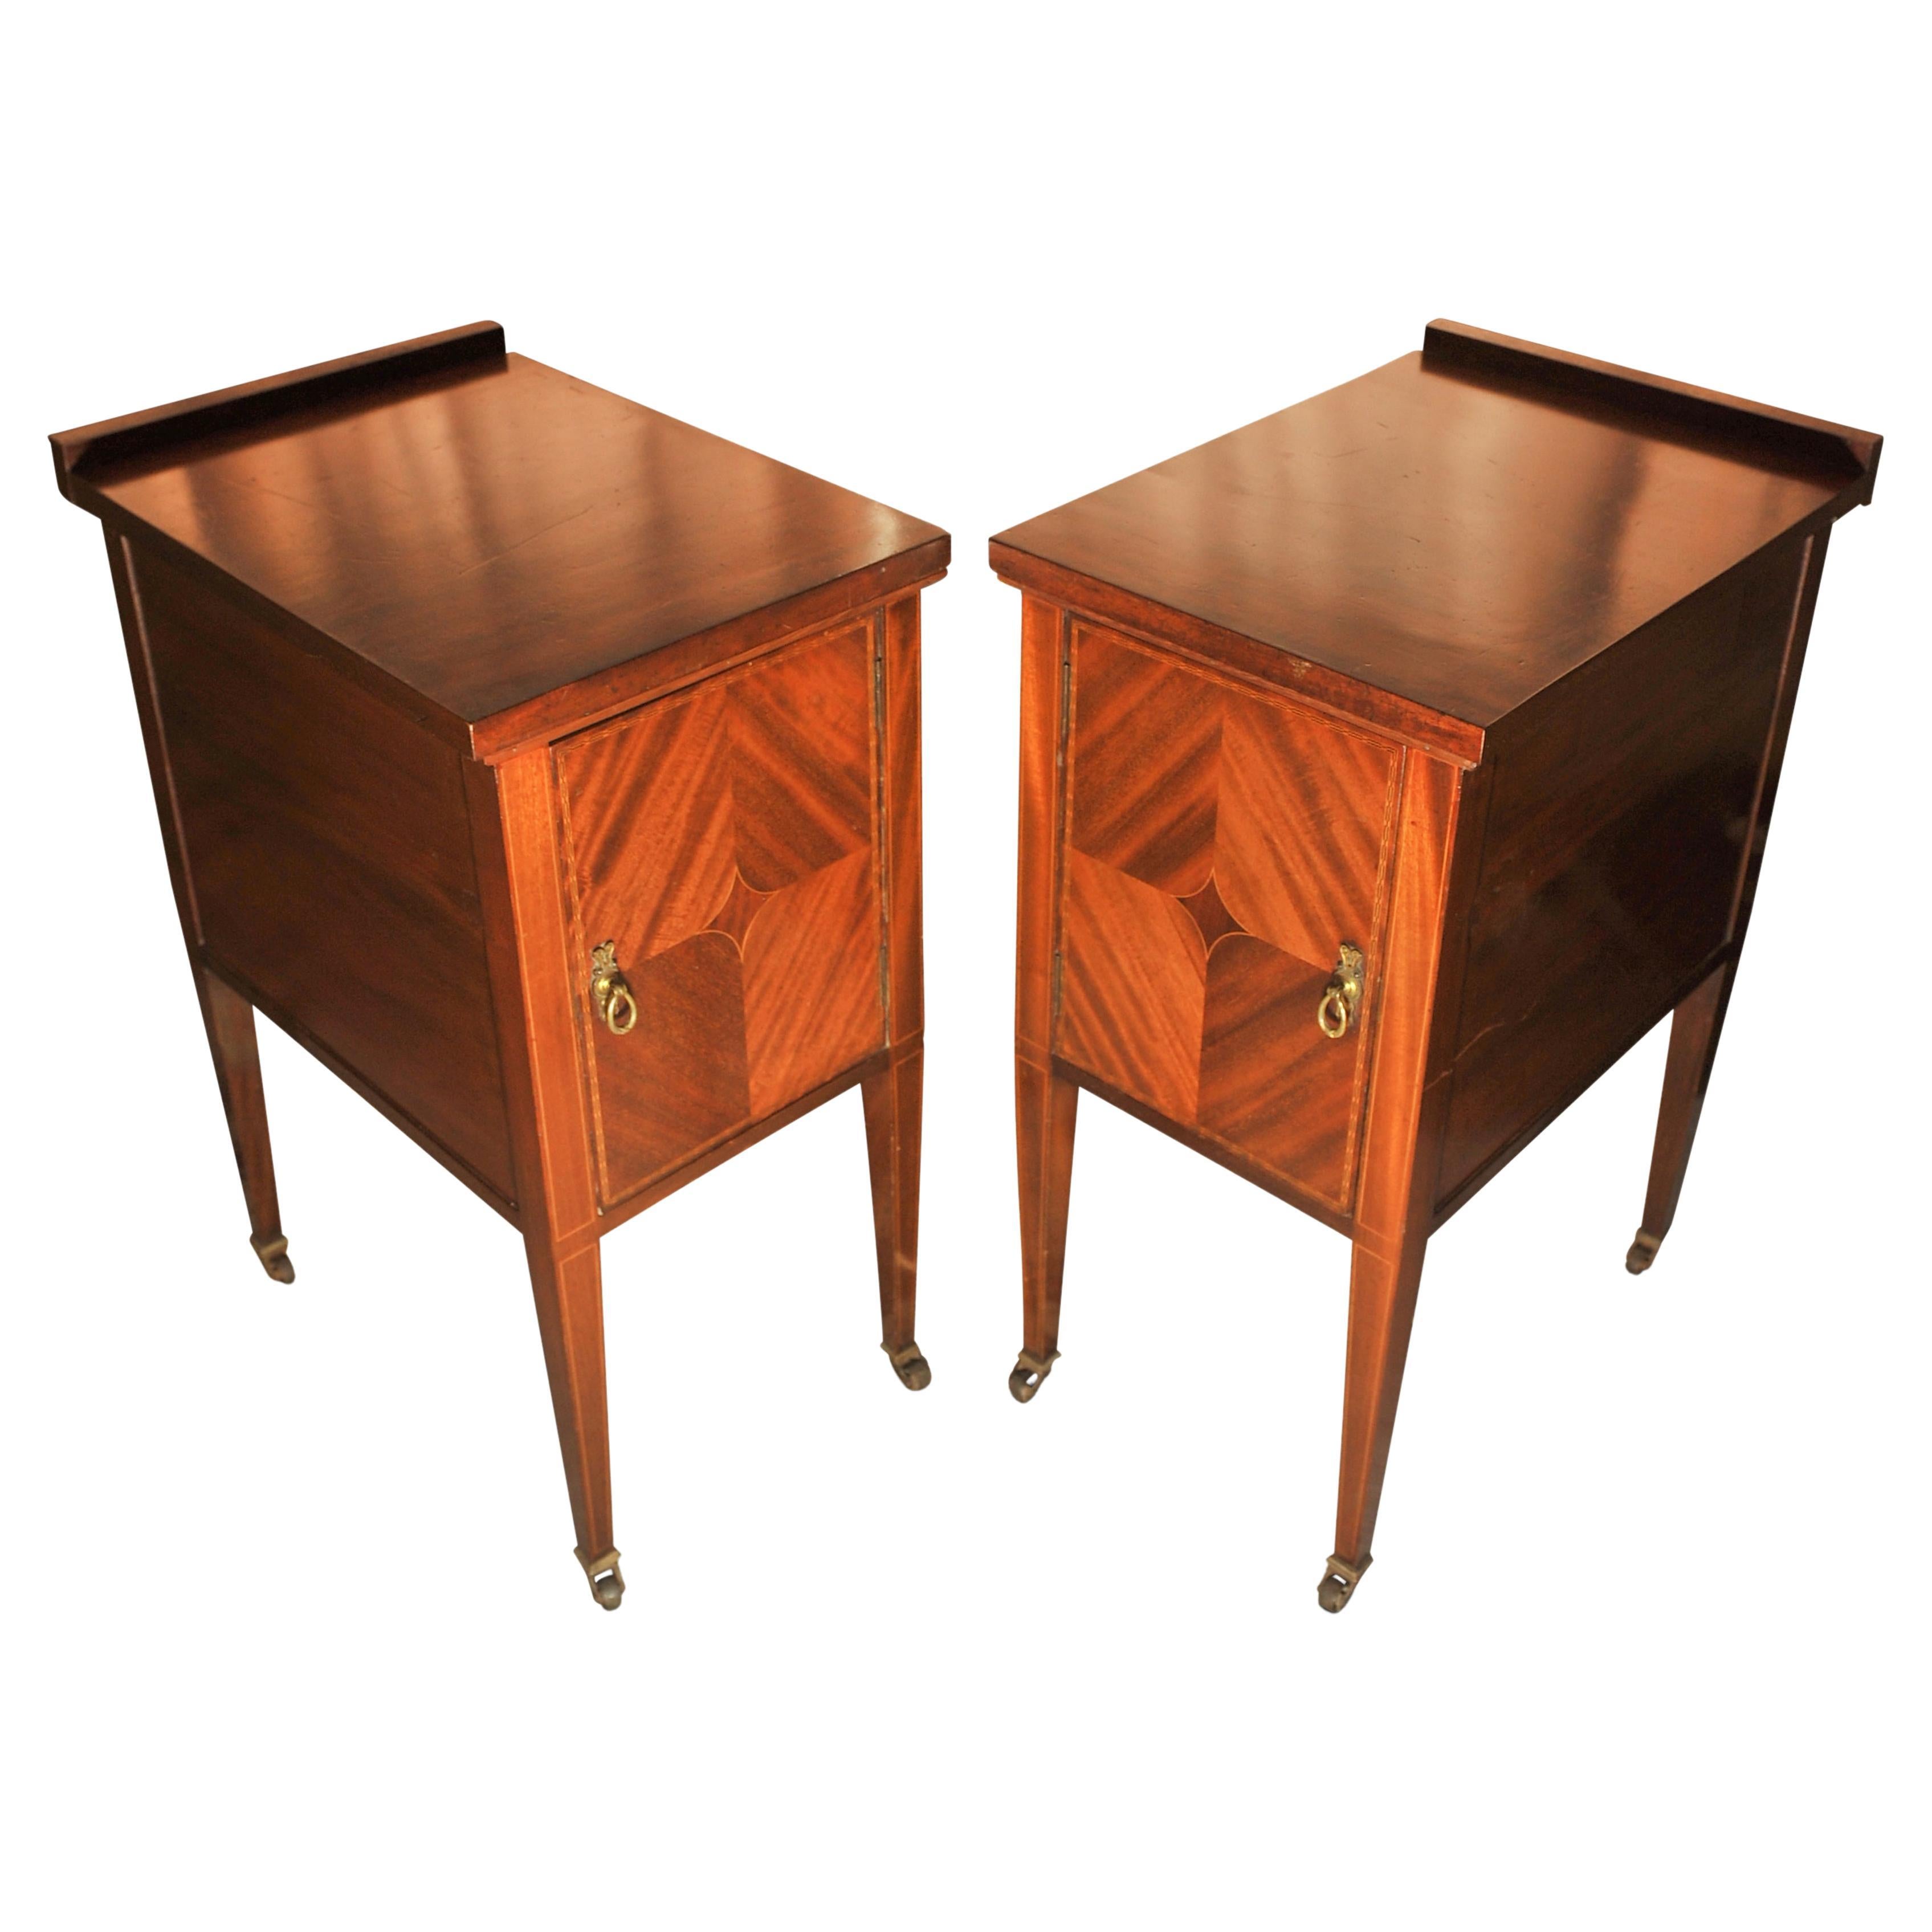 A Pair of Matching Edwardian Handcrafted Pot Cupboards With Brass Drop Handles With Attractively Arranged Flame Mahogany Veneer Fronts With Wood Inlay 

